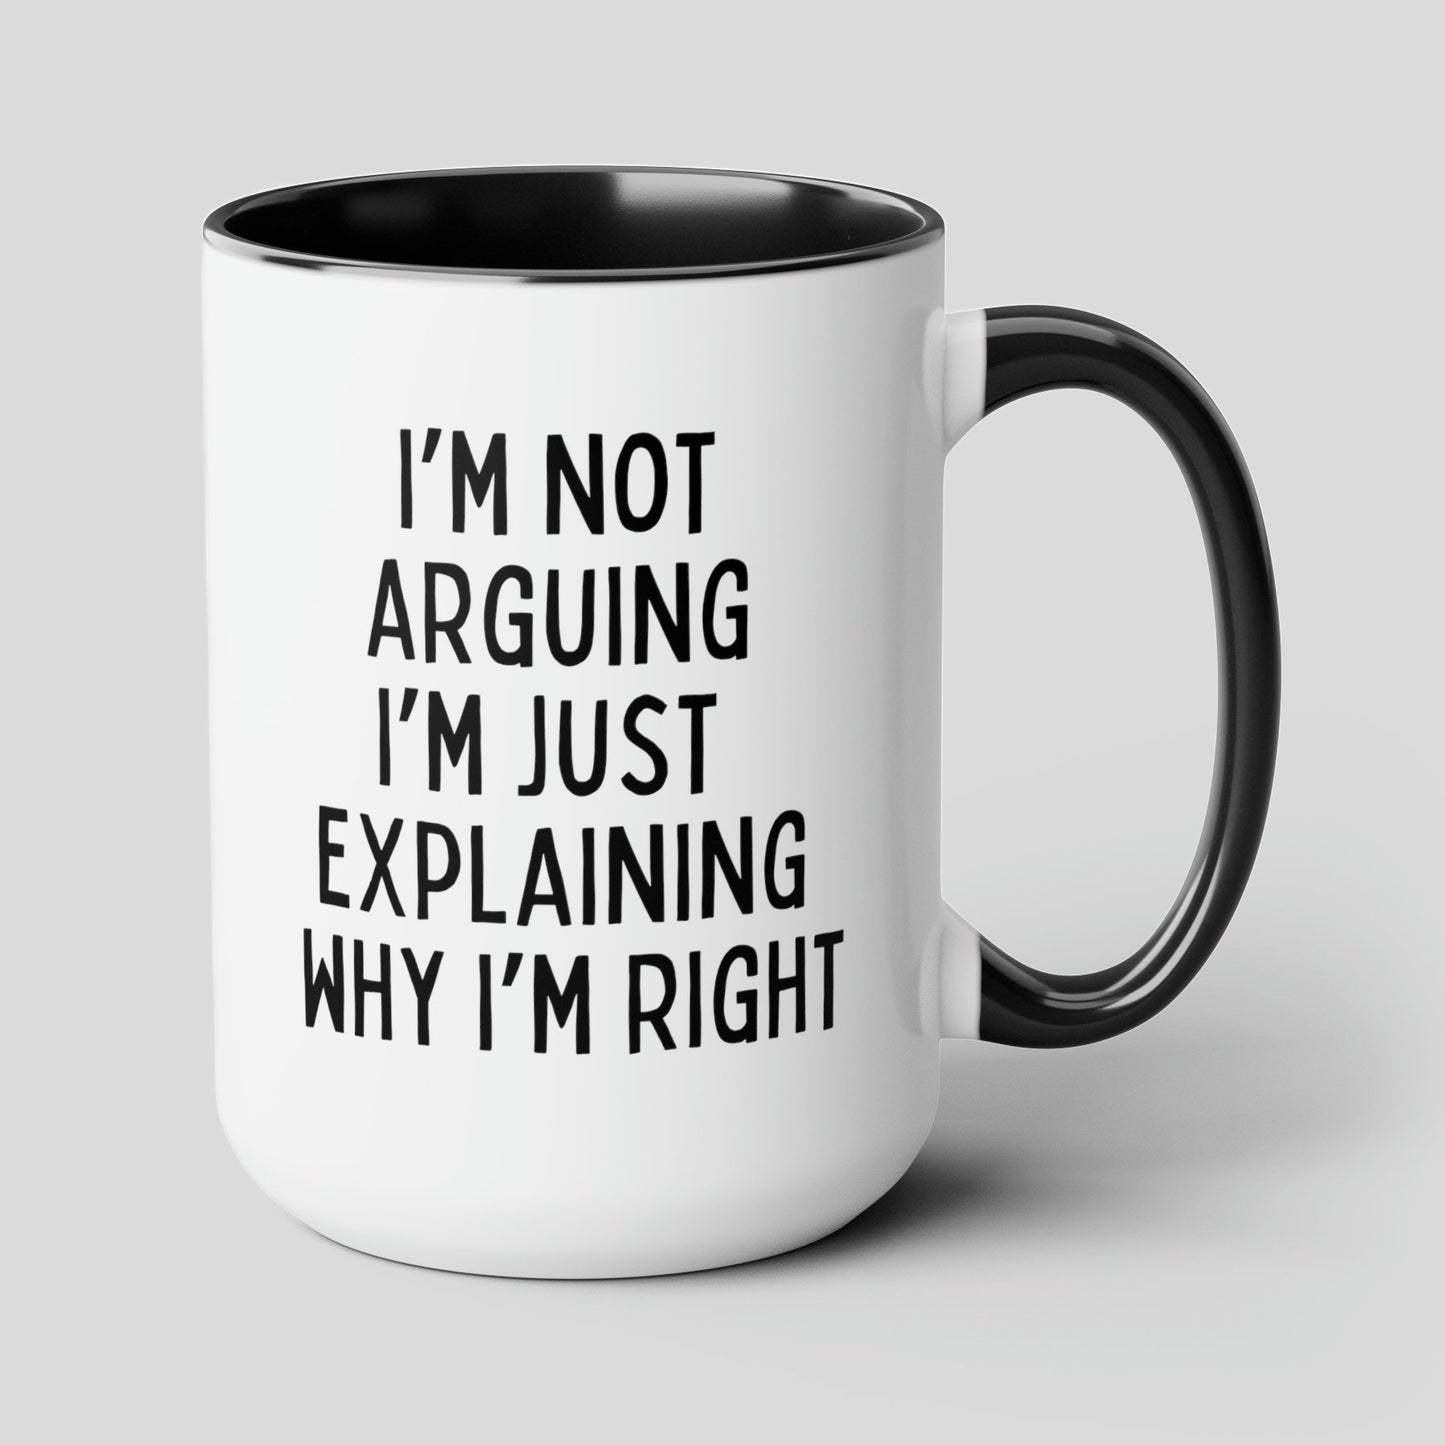 I'm Not Arguing I'm Just Explaining Why I'm Right 15oz white with black accent funny large coffee mug gift for birthday christmas sarcastic sassy snarky tea cup waveywares wavey wares wavywares wavy wares cover